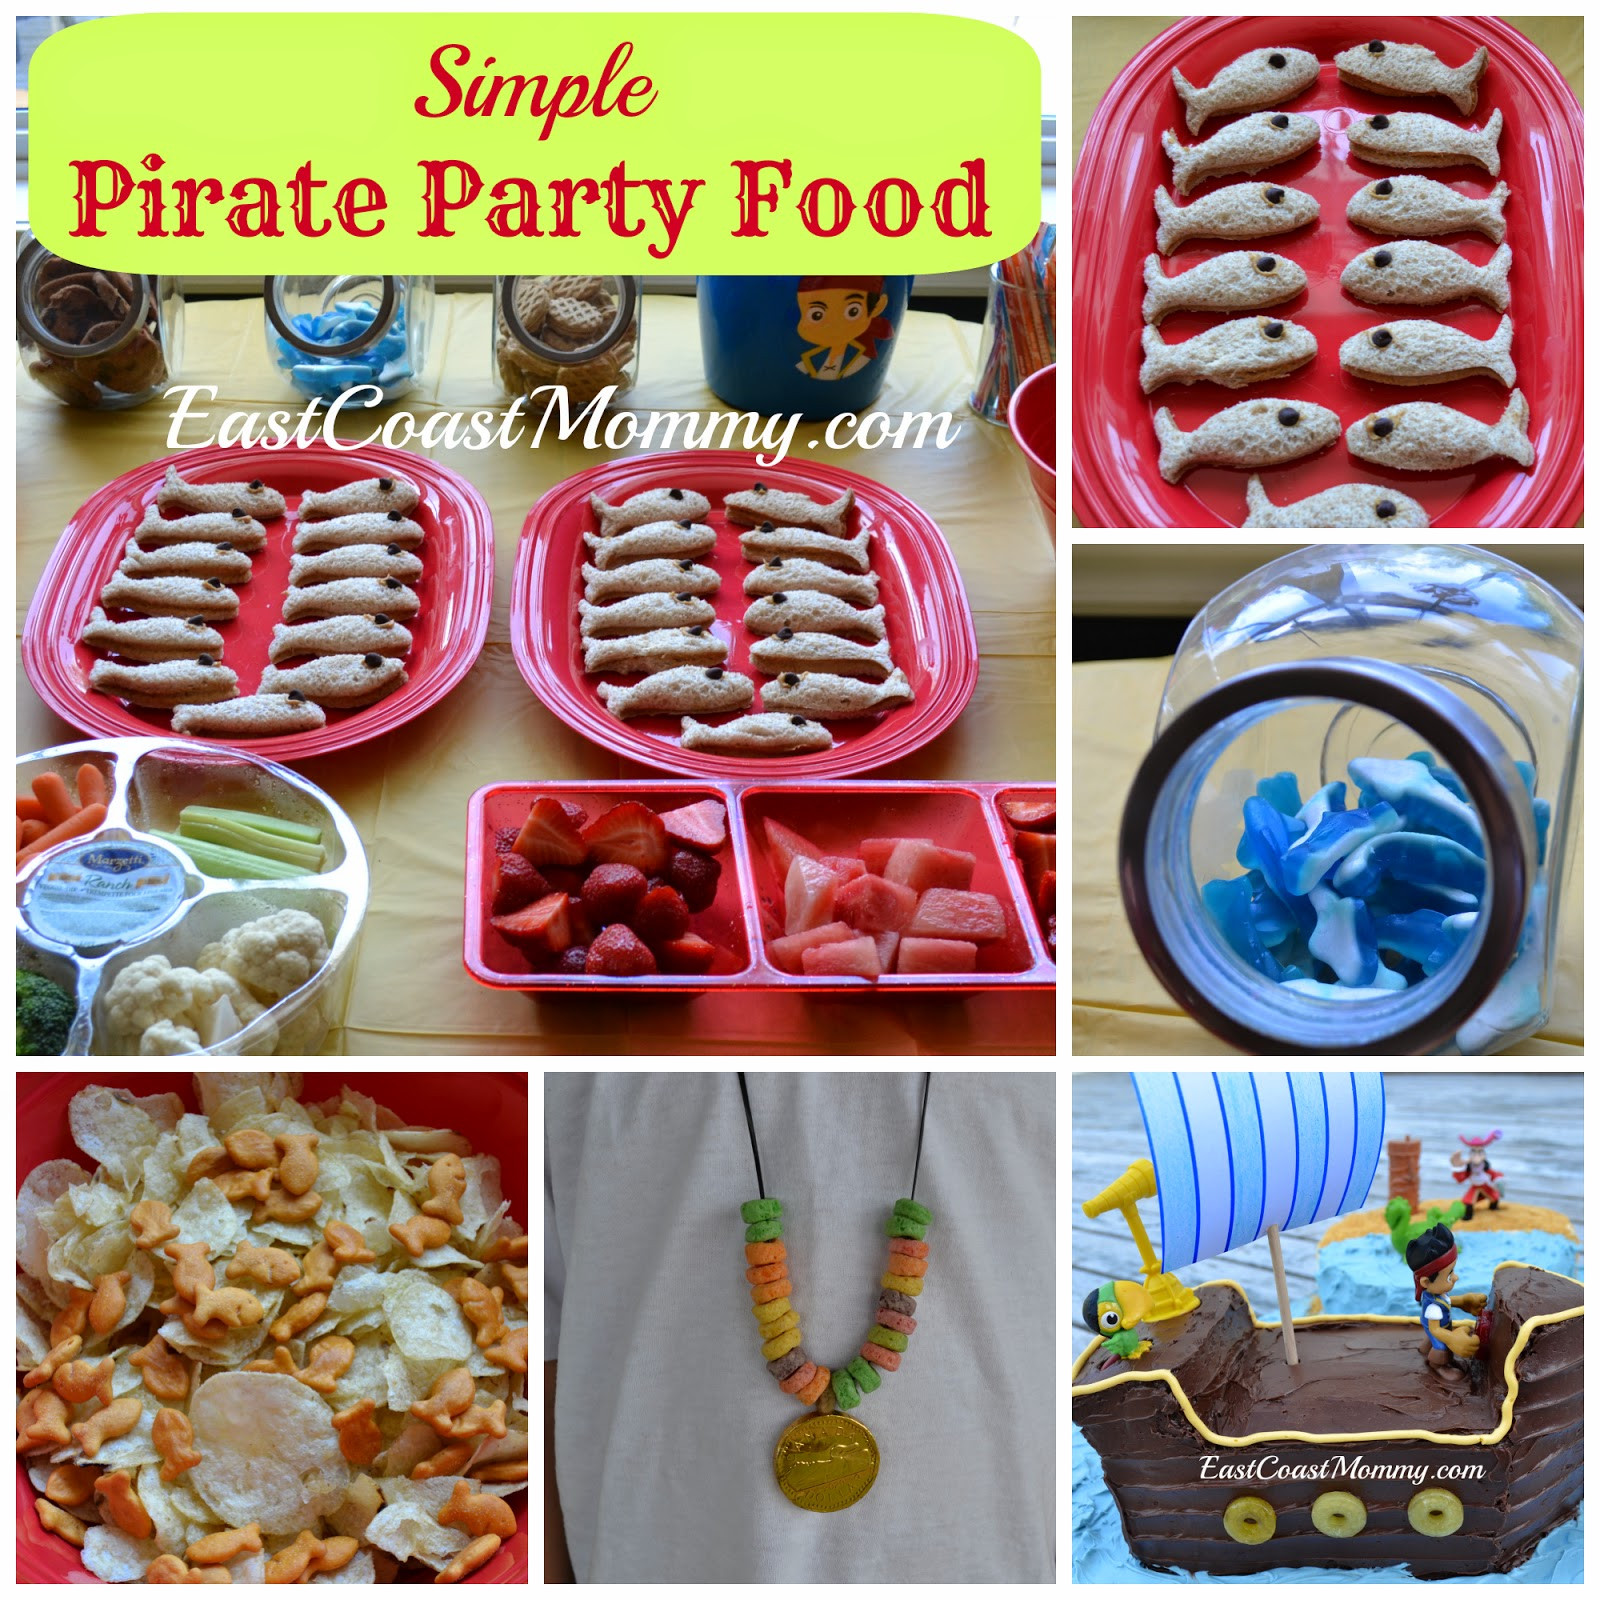 Pirate Birthday Party Food Ideas
 East Coast Mommy Jake and the Neverland Pirates Party Food